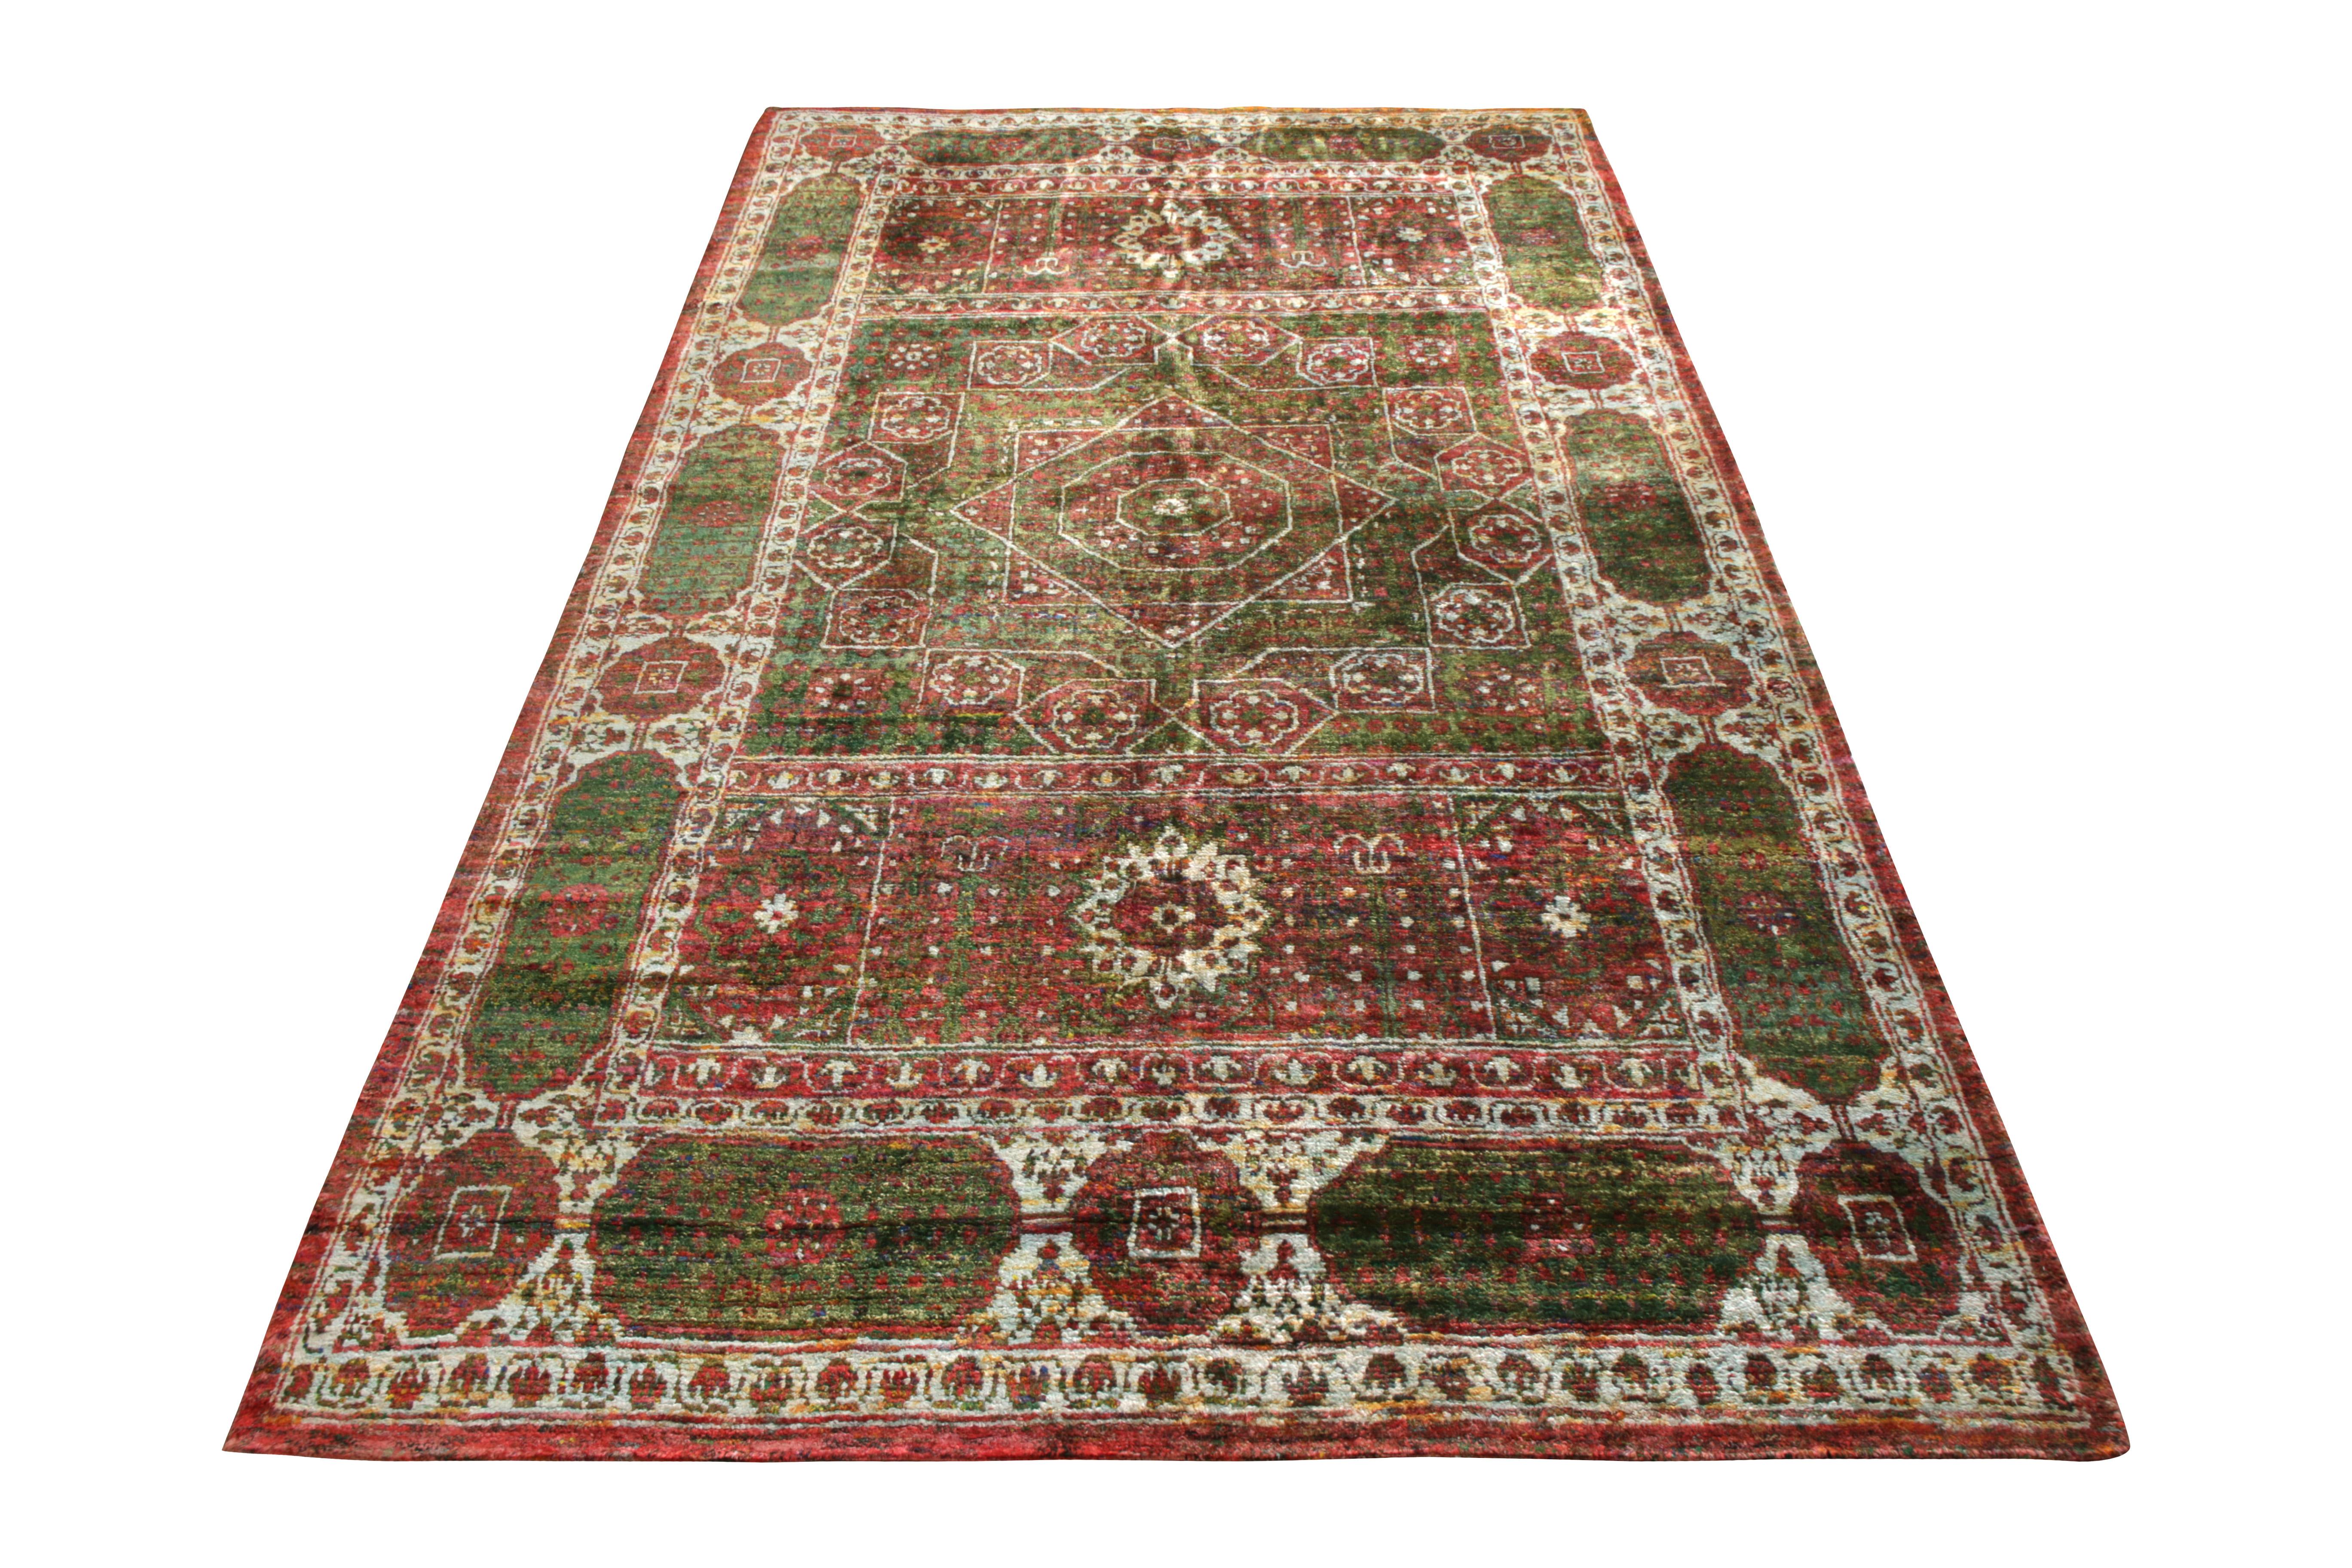 A 5x9 hand-knotted piece from Rug & Kilim’s Modern Classics Collection, inspired from iconic Indian rugs of unique transitional approach. Catching attention is a central medallion pattern that branches out elegantly with a floral pattern lending a